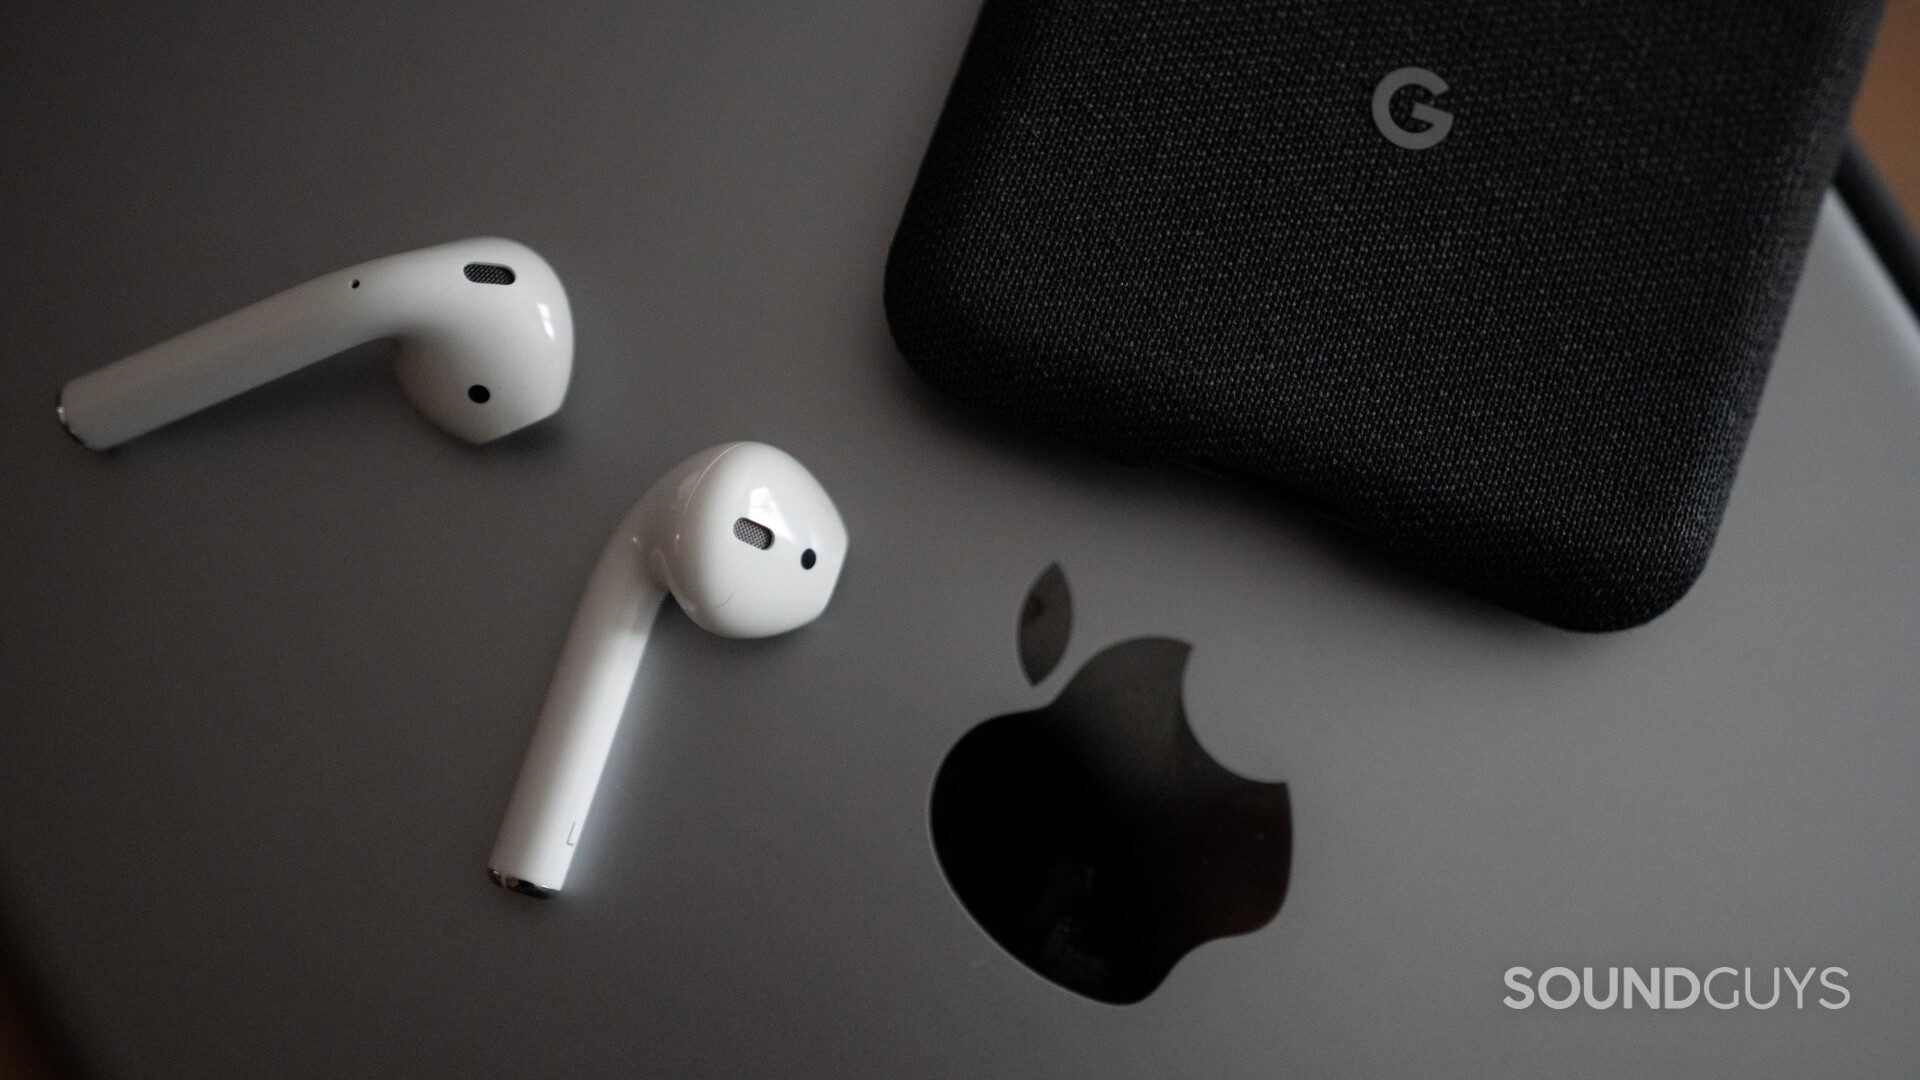 How to connect AirPods to your iPhone or Android device